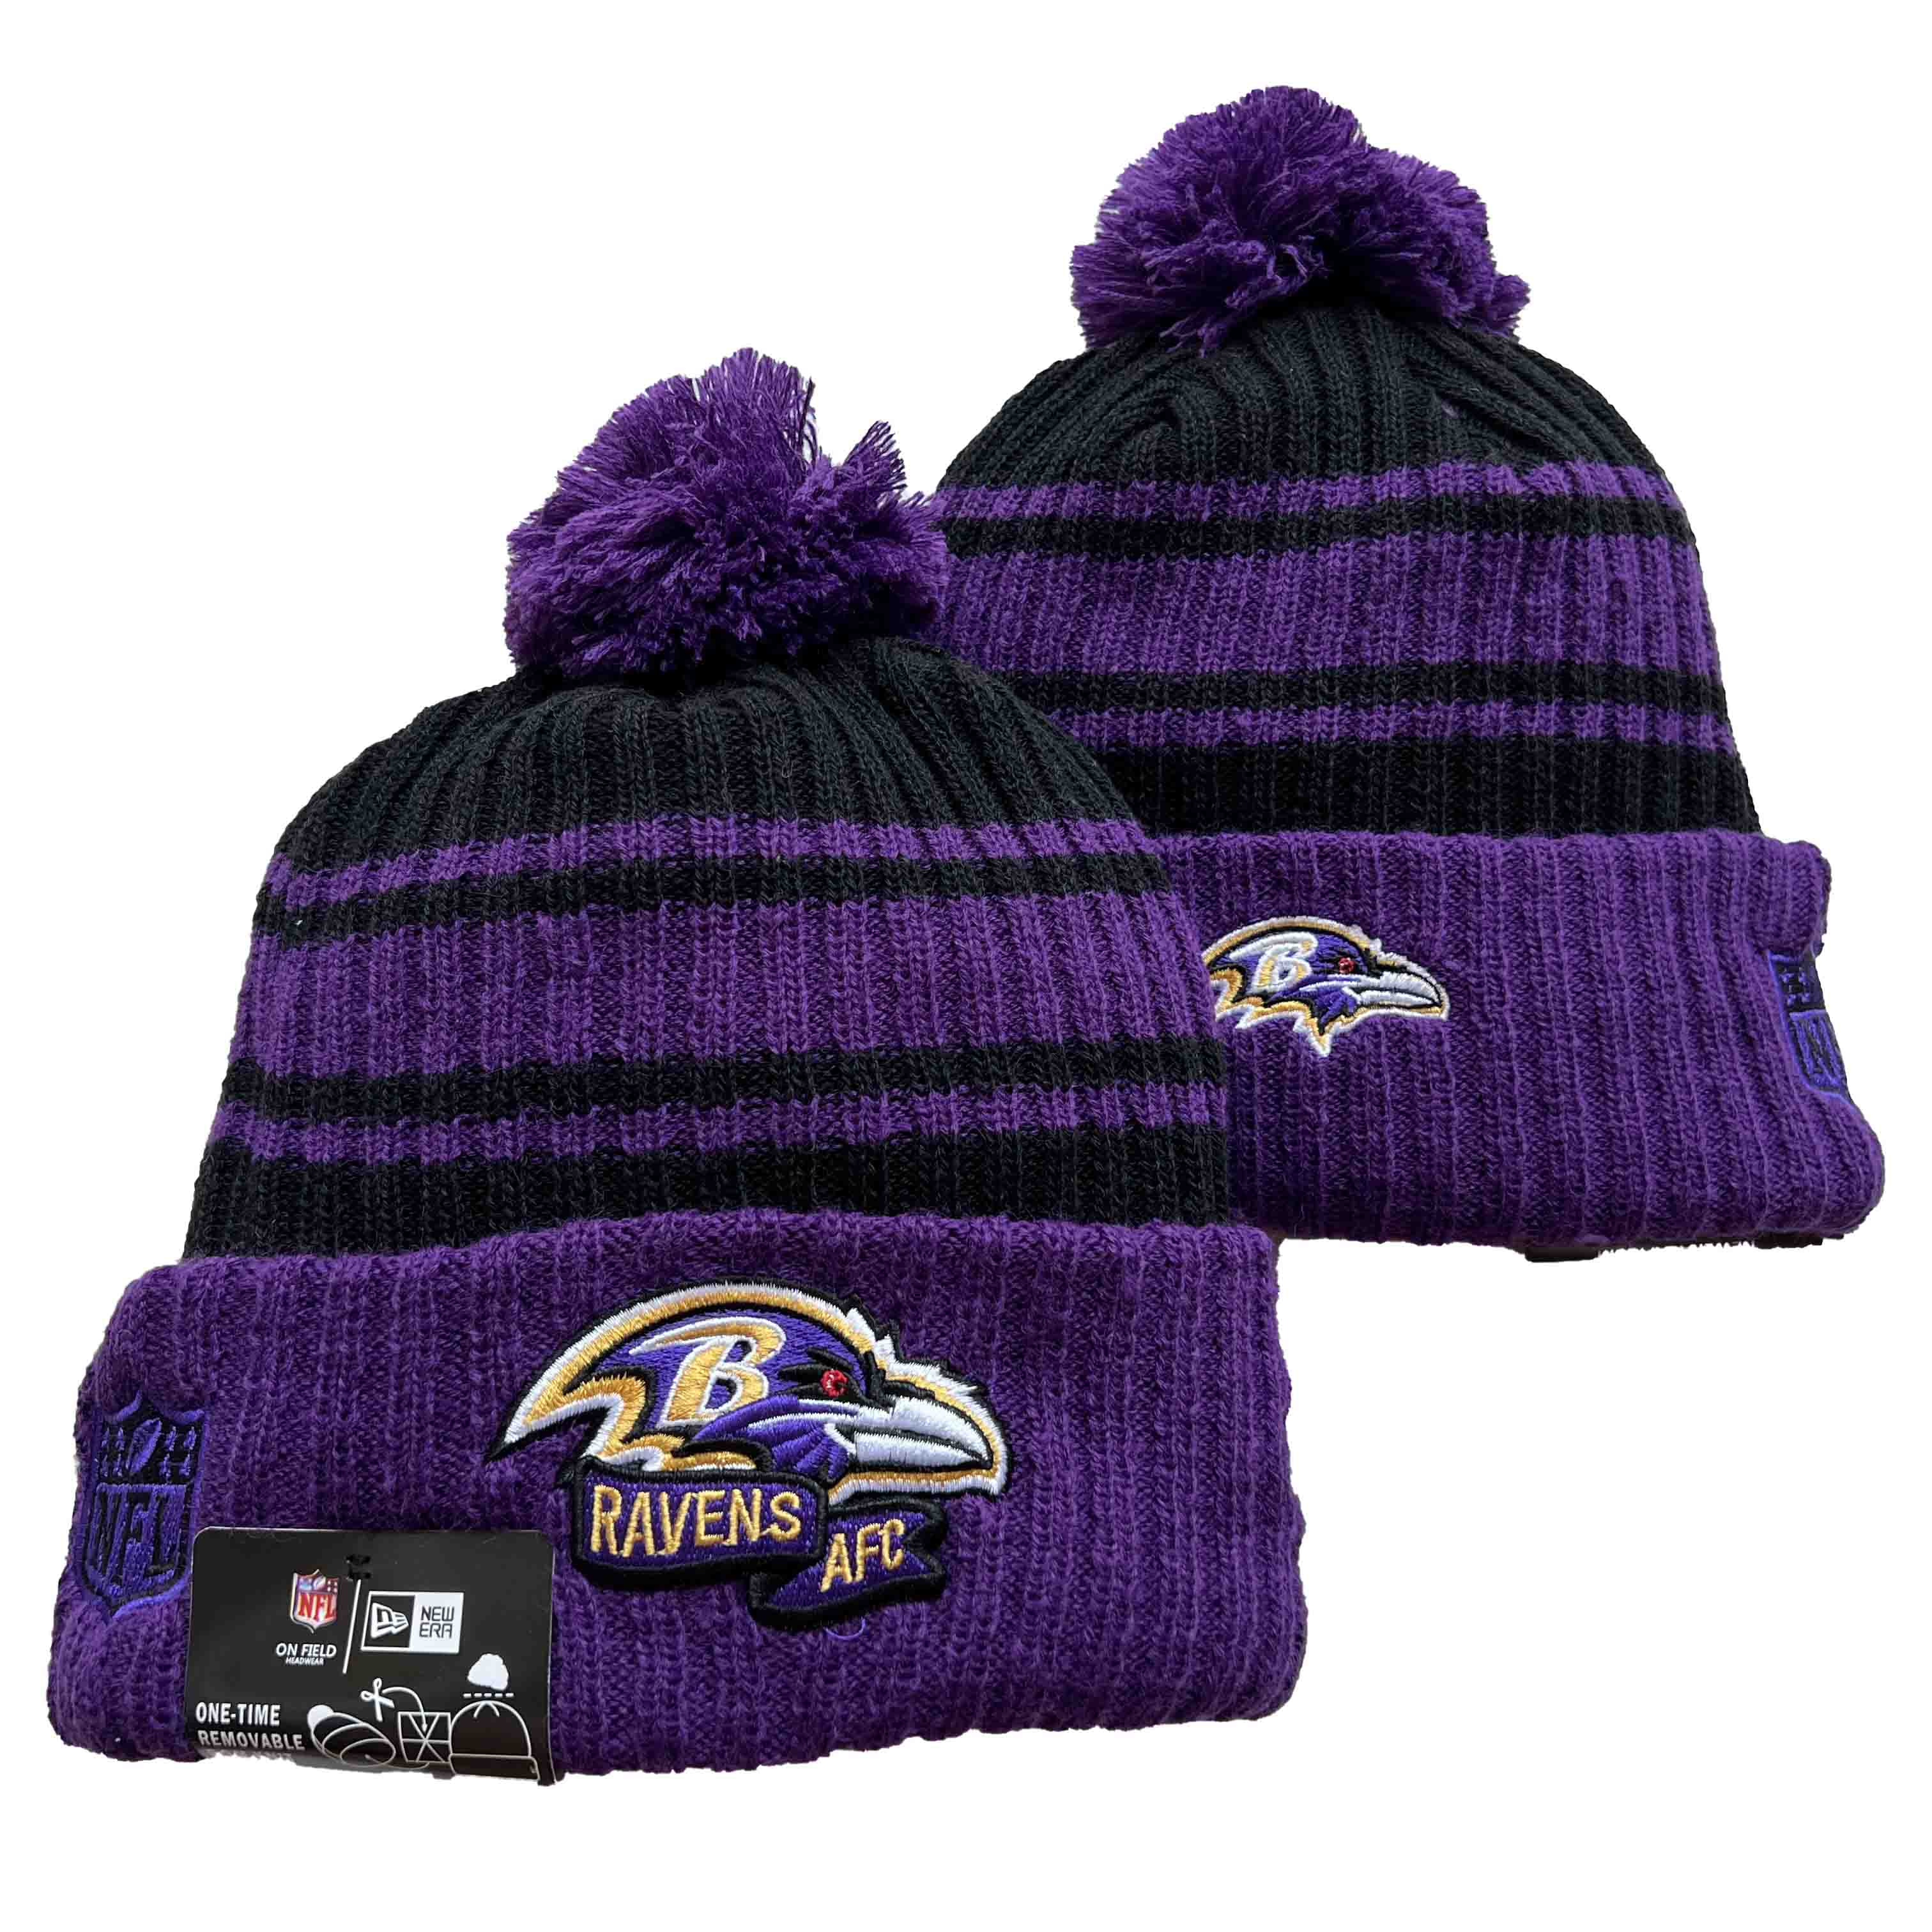 NFL Baltimore Ravens Beanies Knit Hats-YD1193